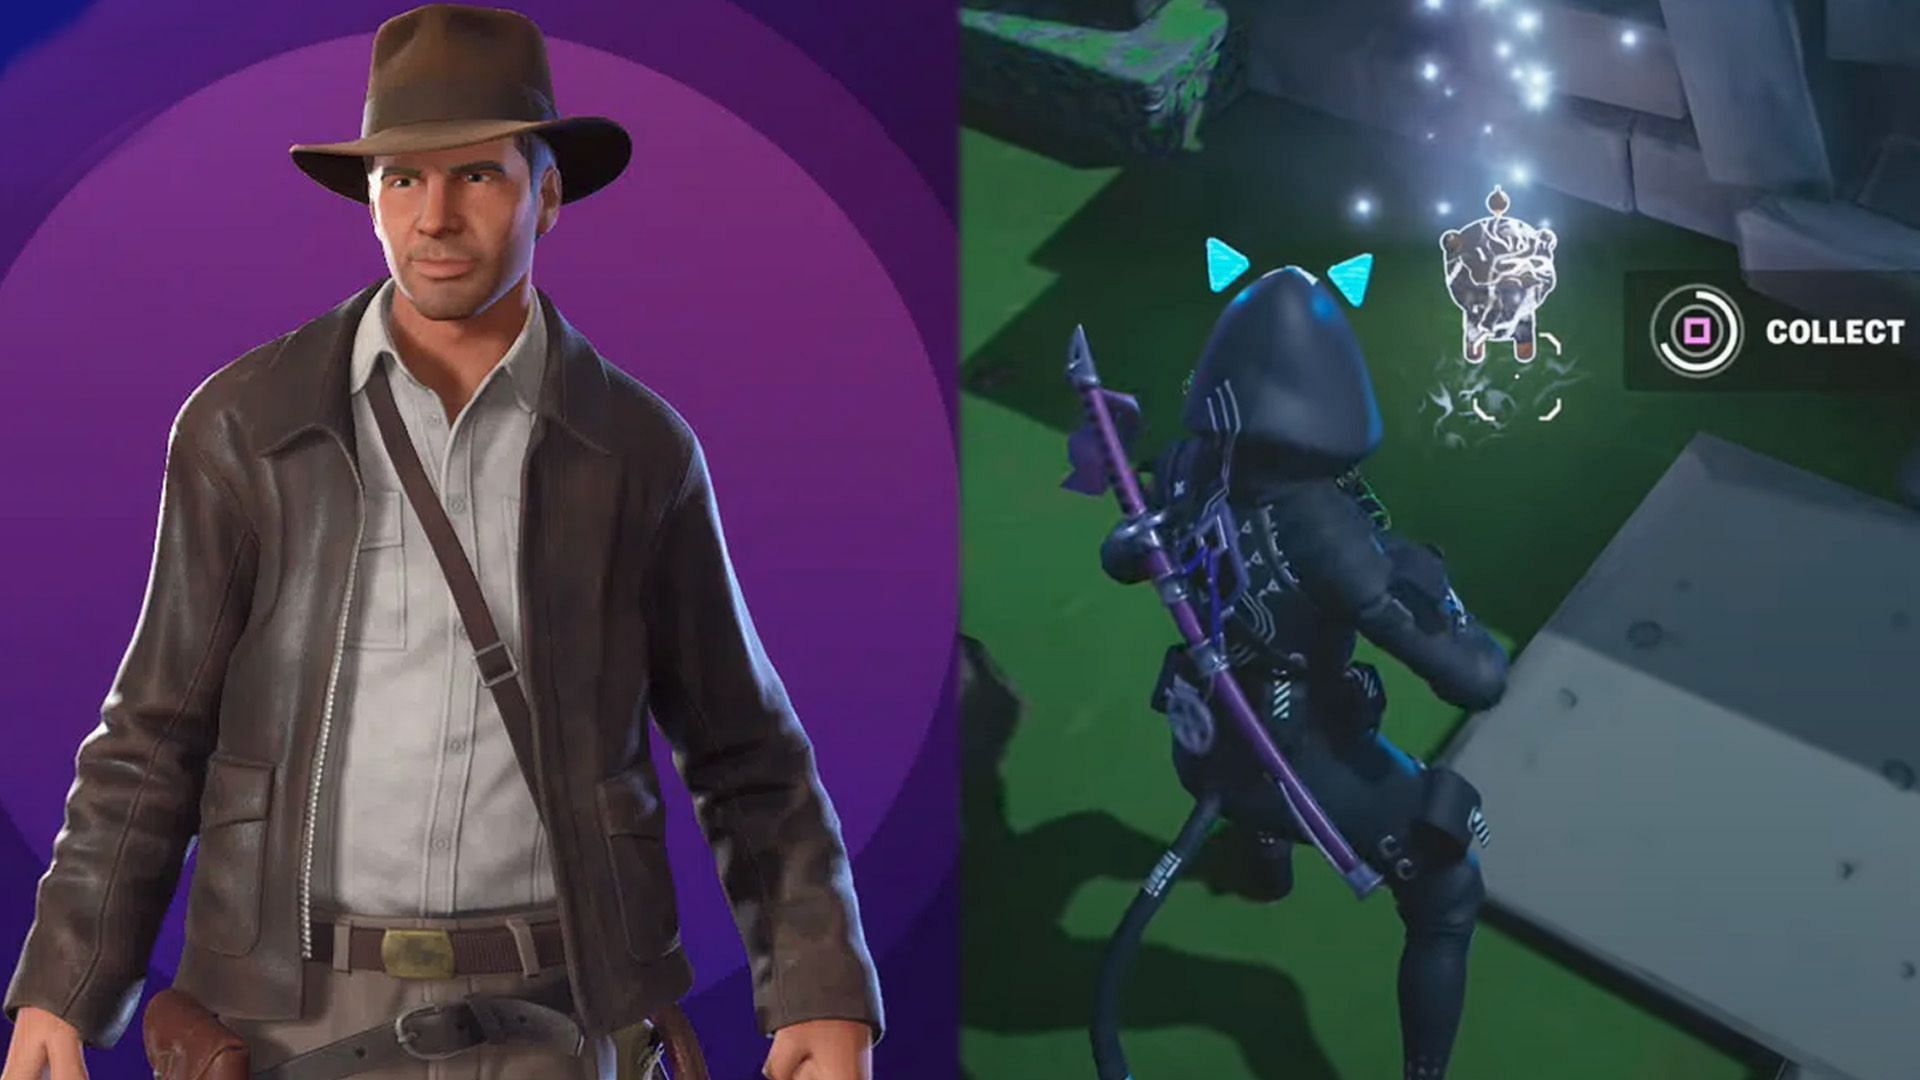 Indiana Jones needs to be unlocked by collecting the Durrrburger Relic from The Temple and The Ruins in a single match (Image via Sportskeeda)